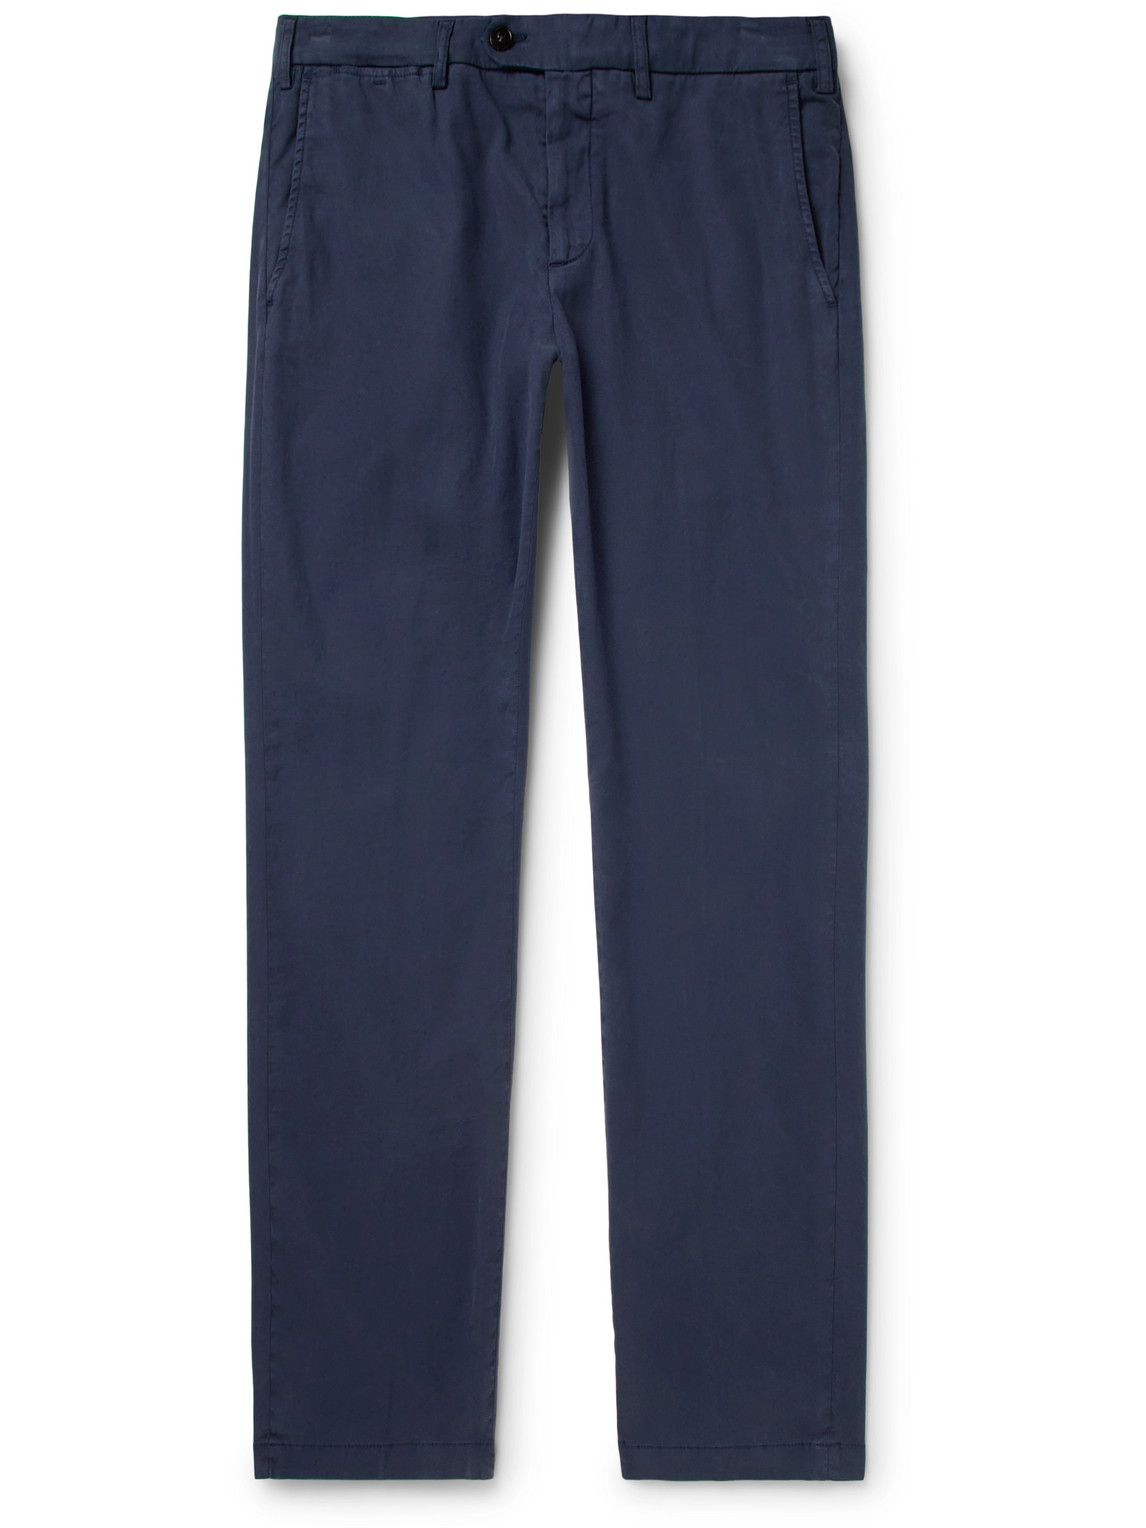 Slim-Fit Garment-Dyed Stretch Lyocell and Cotton-Blend Twill Trousers